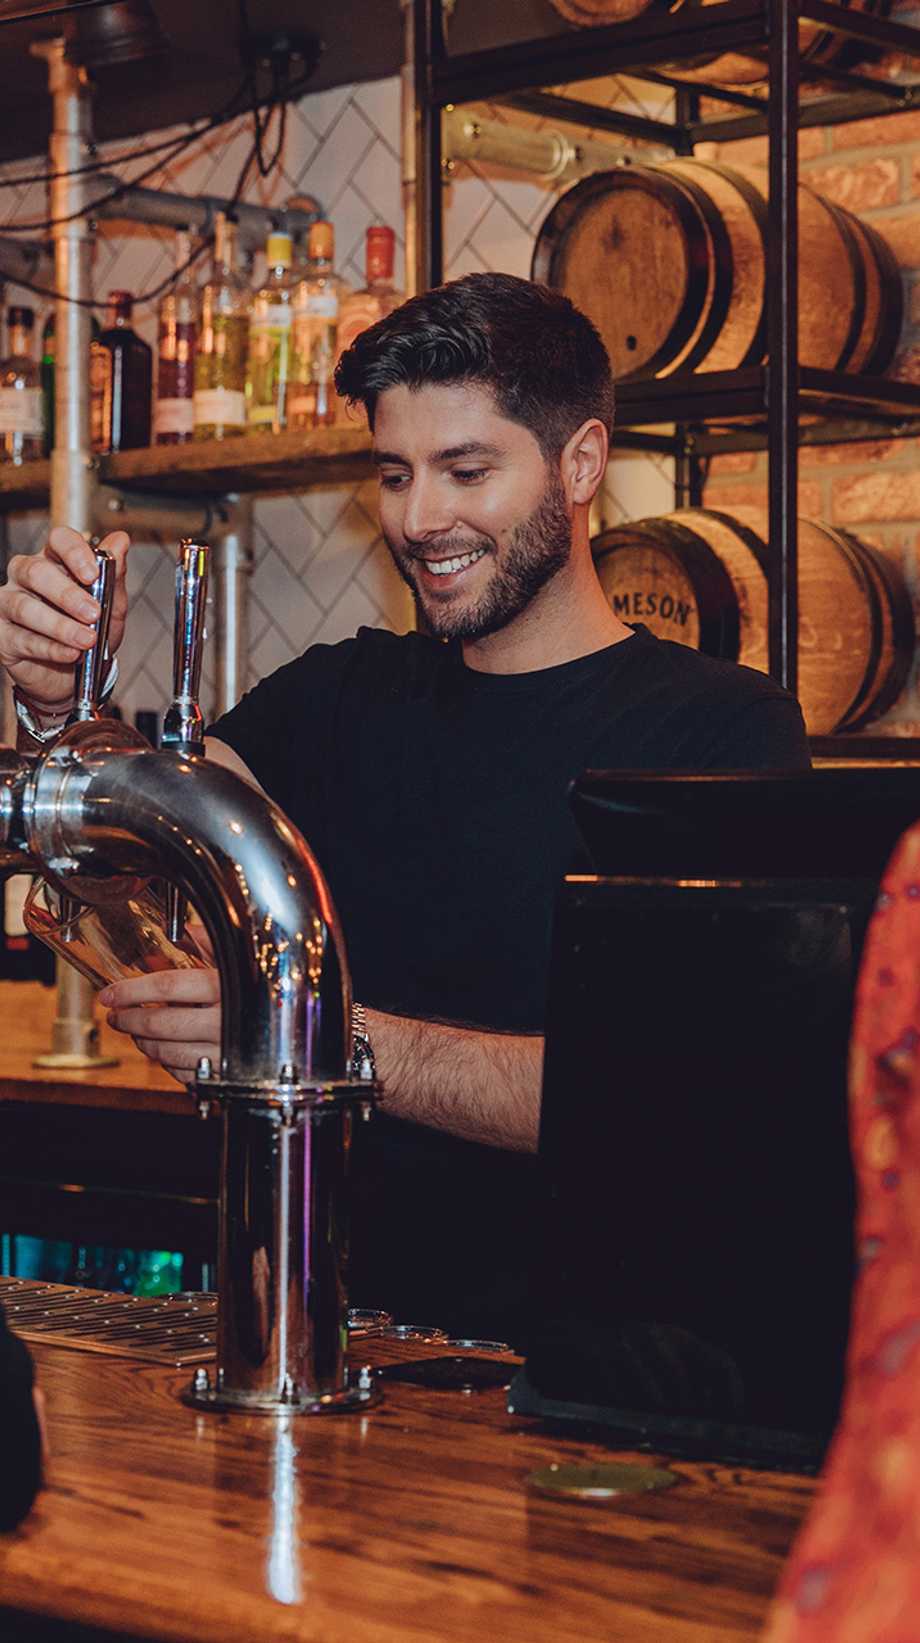 A bearded team member is pouring pints at the bar for waiting guests. Behind him, kegs are in front of an exposed brick wall.